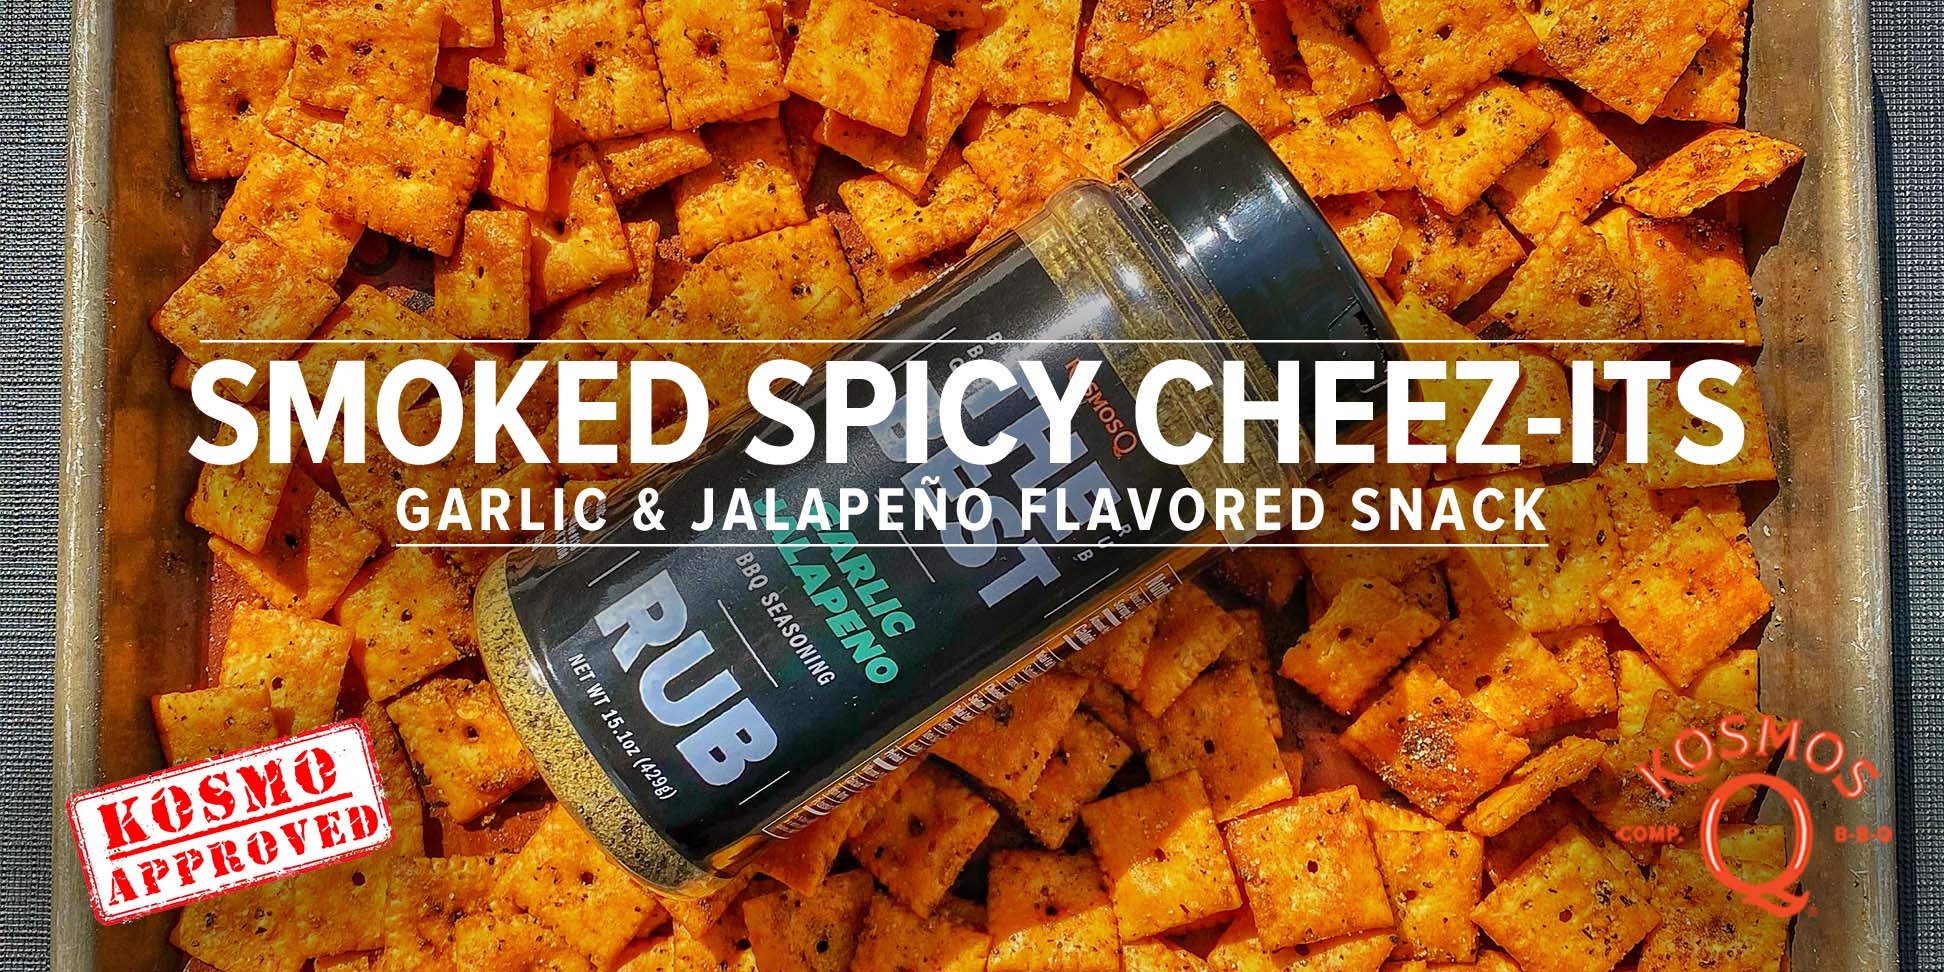 Smoked Spicy Cheez-Its -  Kosmos Style